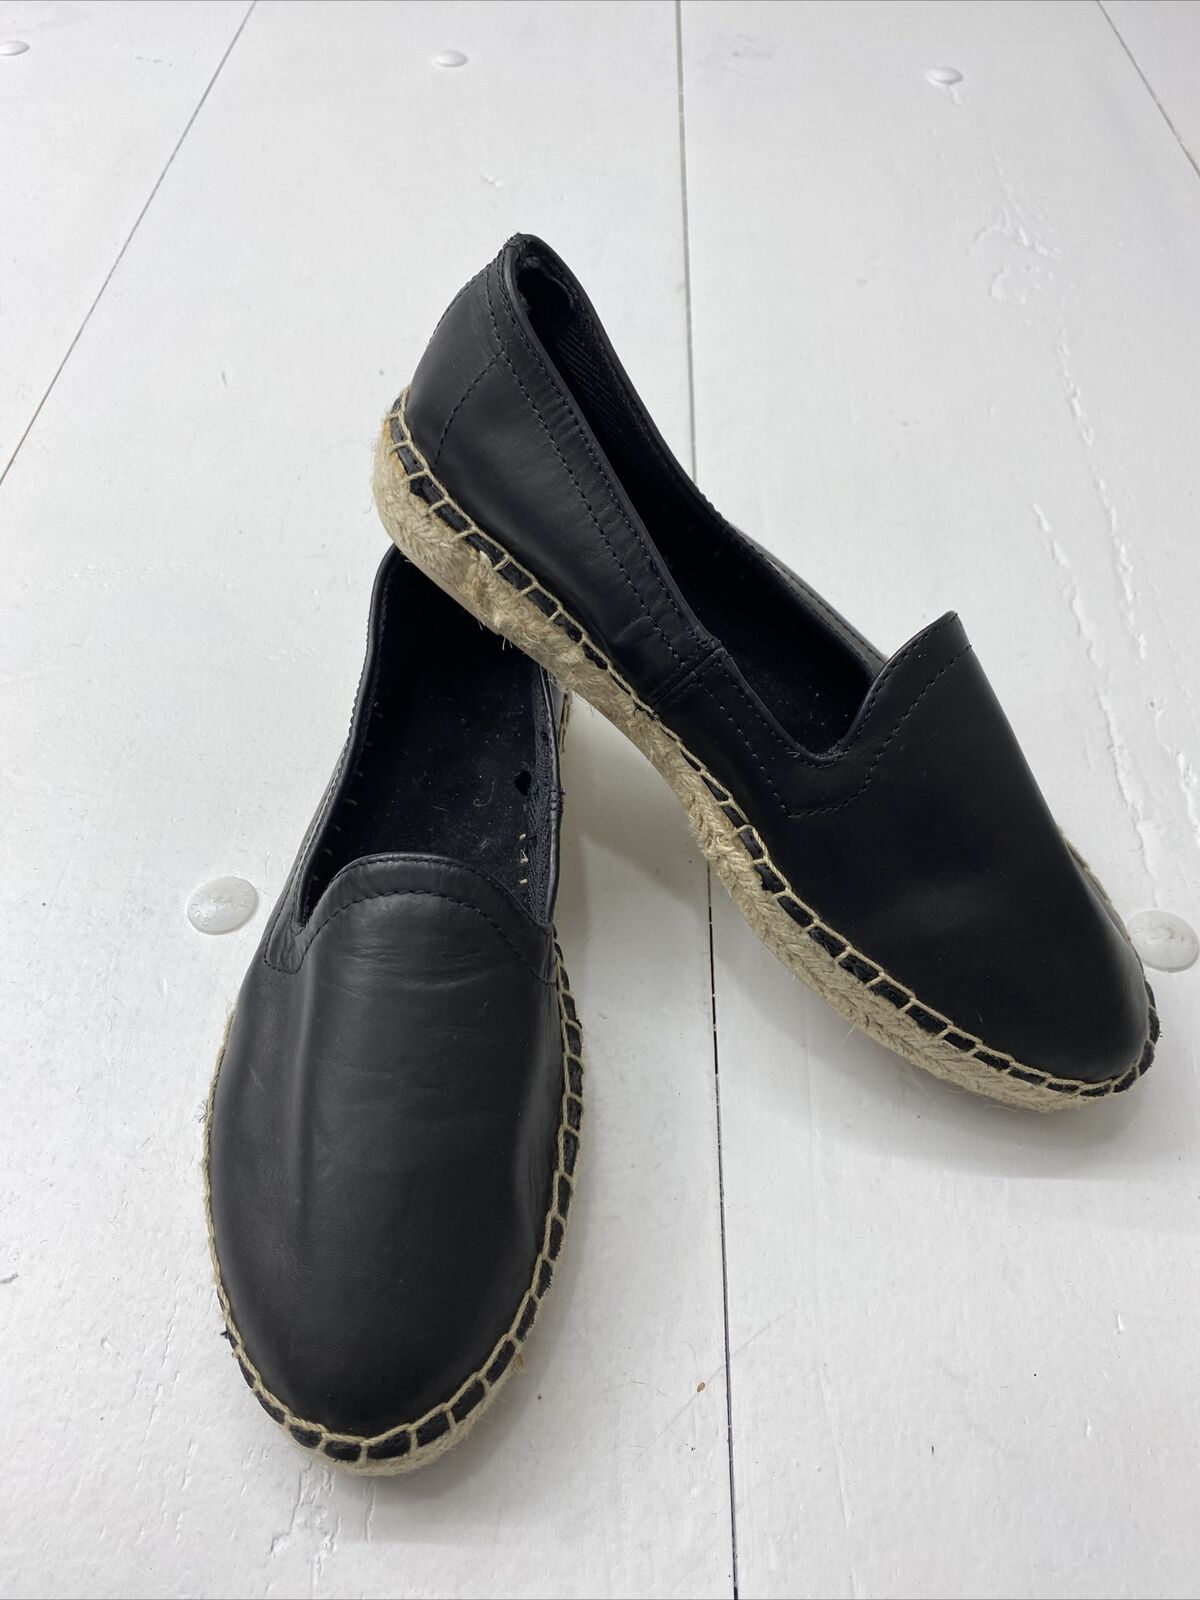 Gap Black Leather Espadrille Loafers Slip On Shoes Round Toe Women’s Size 9  New